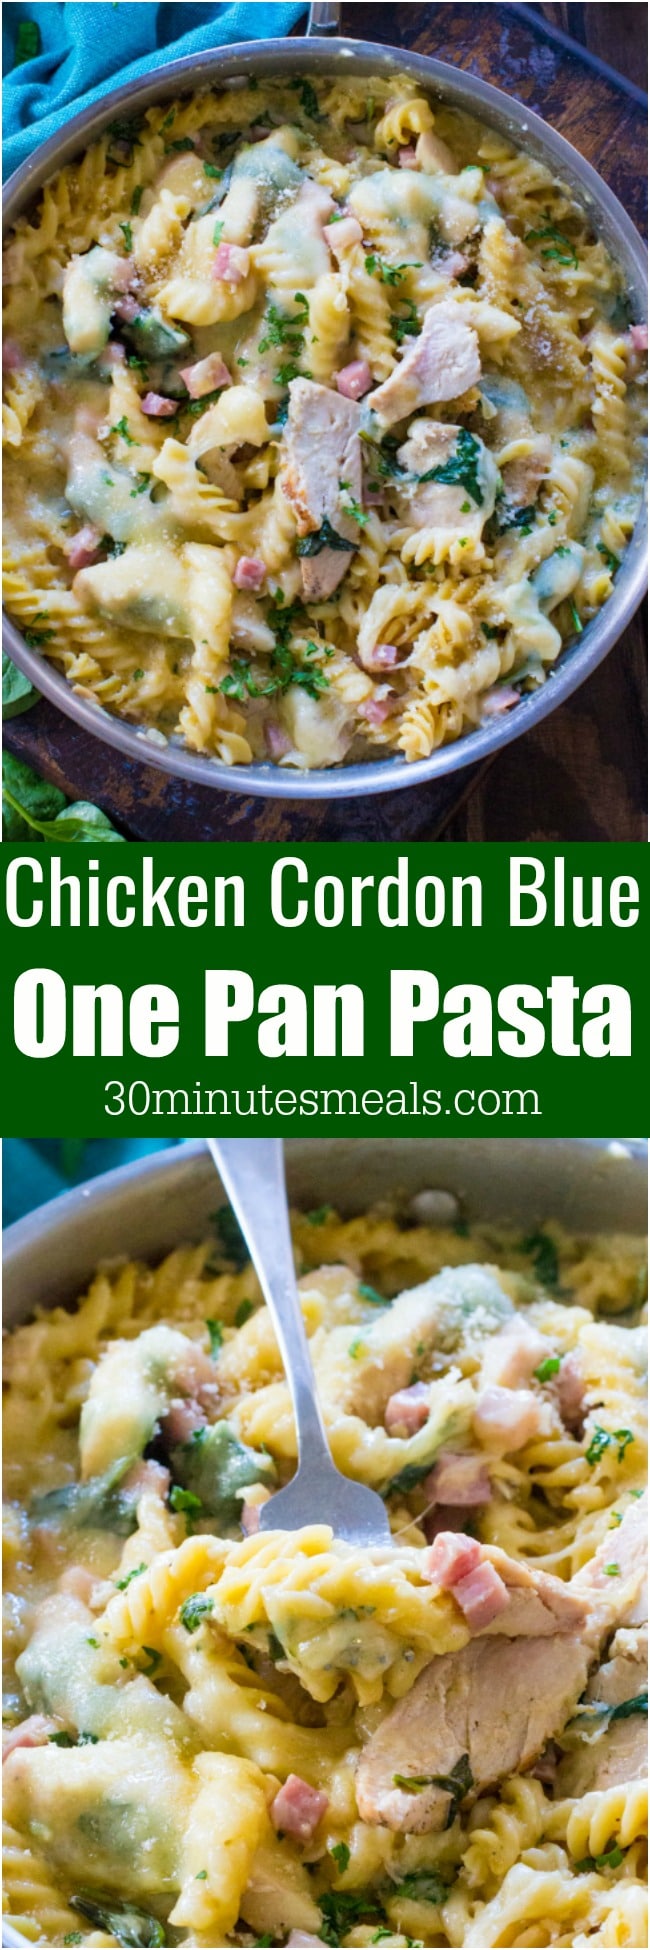 30 Minute Chicken Cordon Bleu Pasta packs all of the delicious flavors of the classic dish, in an easy one pan pasta recipe!